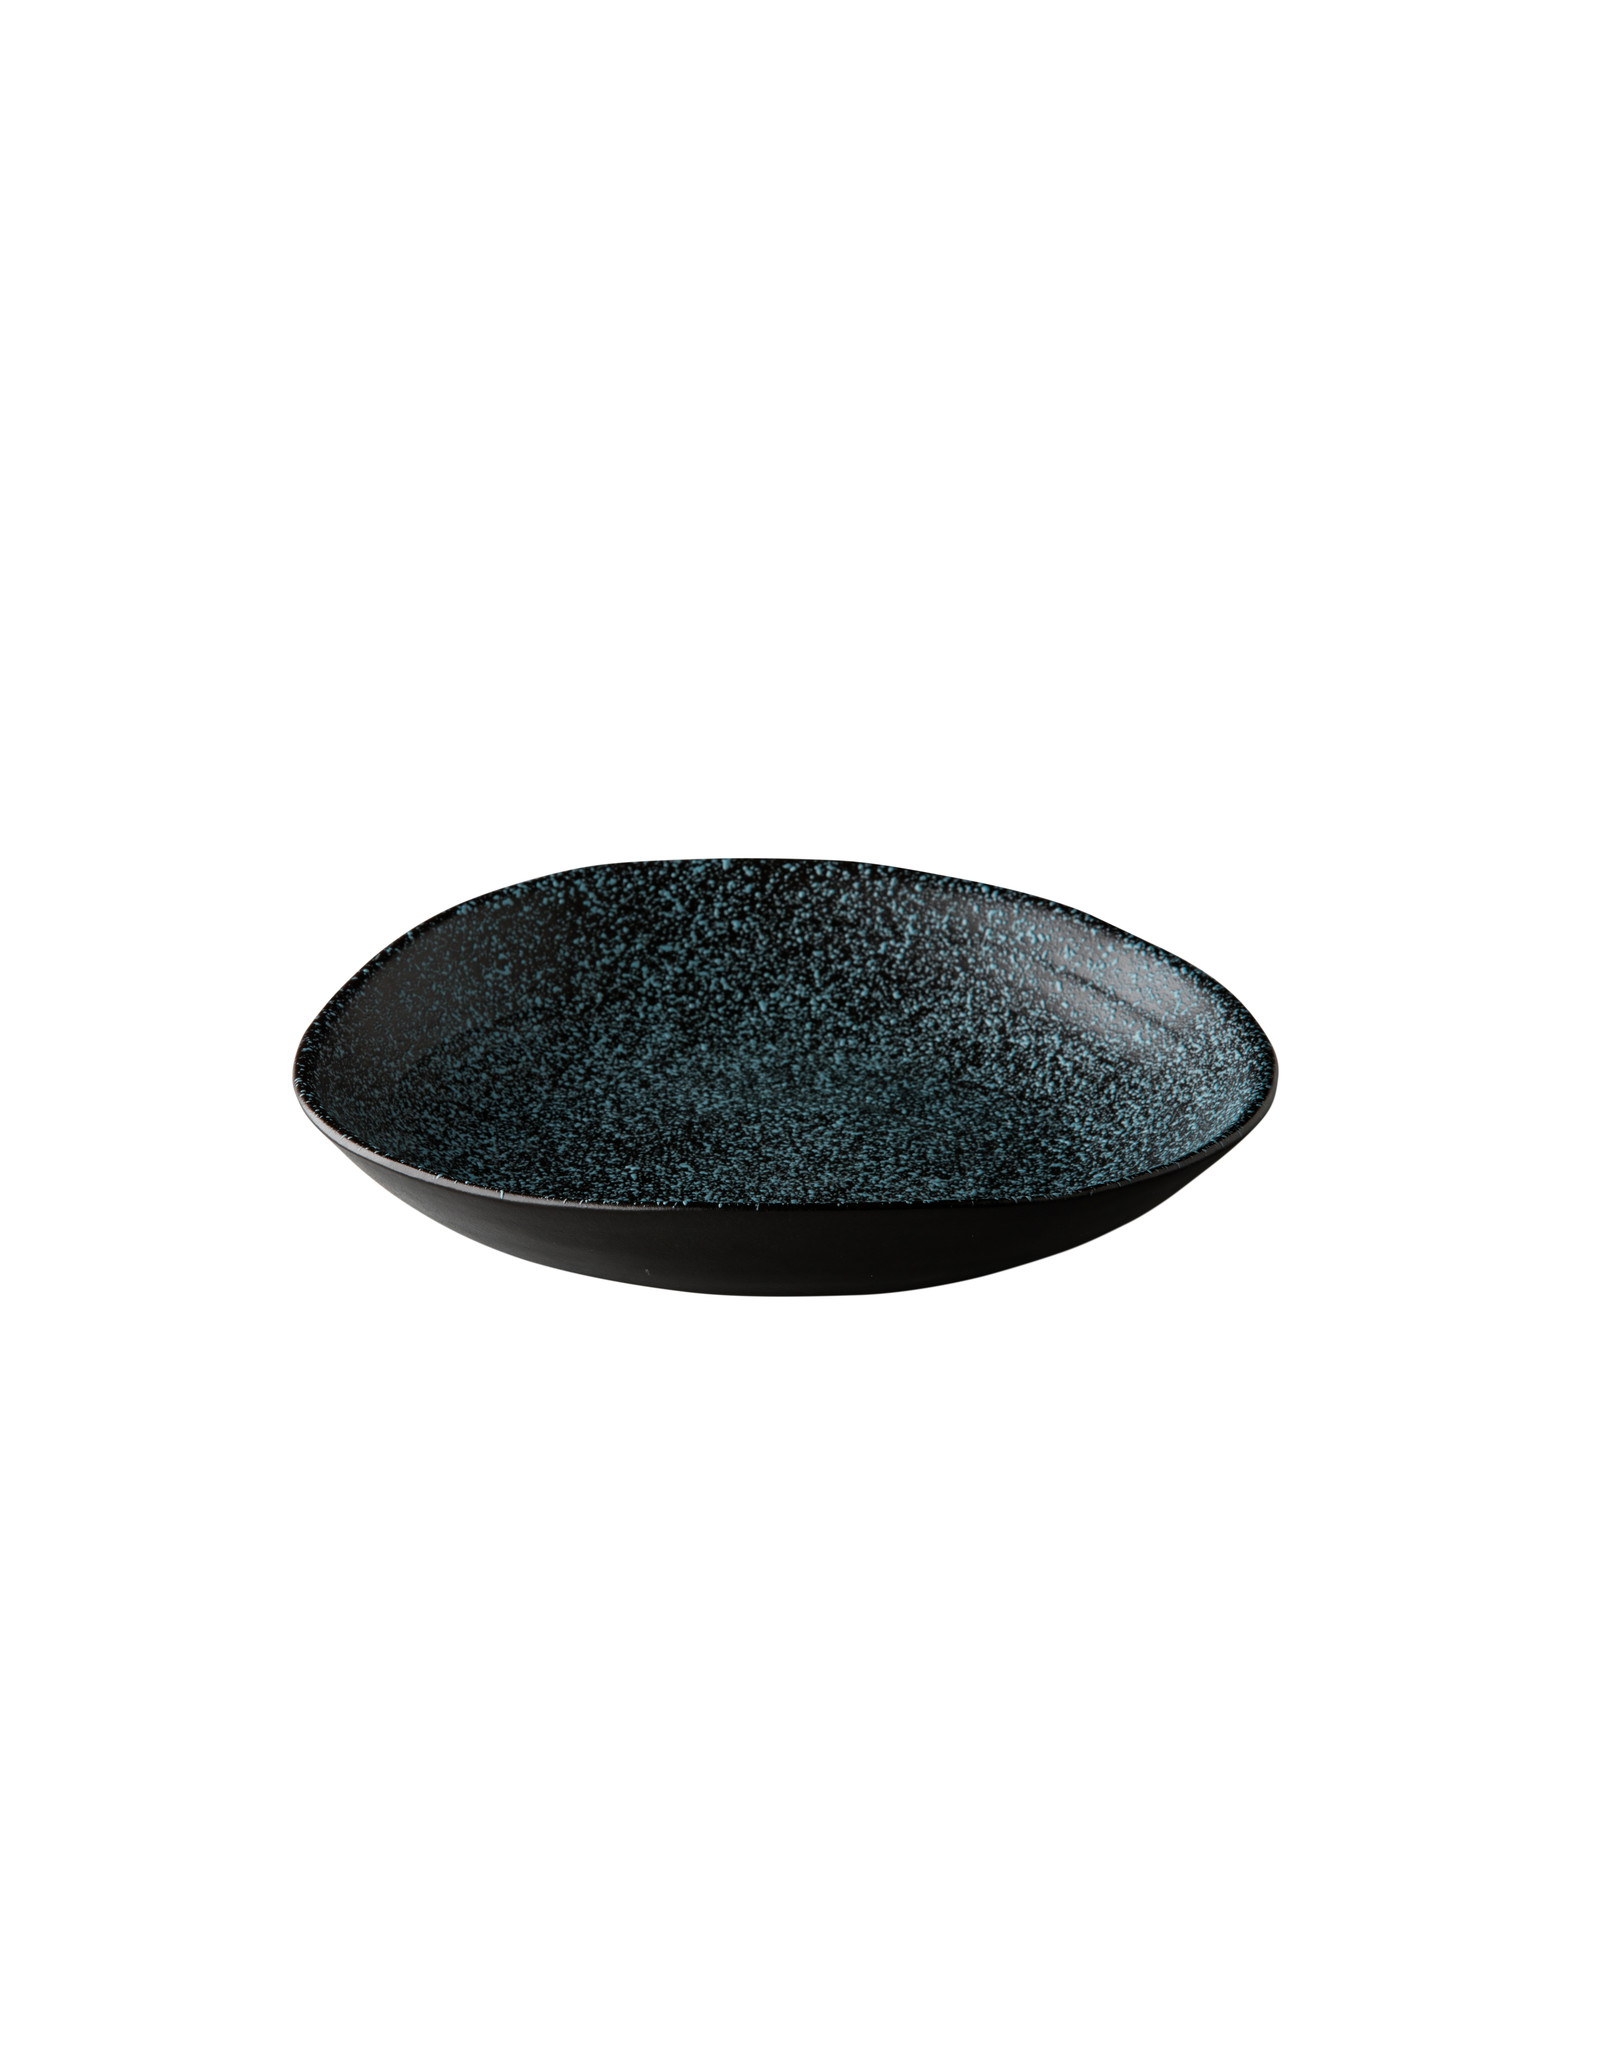 Stylepoint Chameleon deep plate black with blue spots 24cm